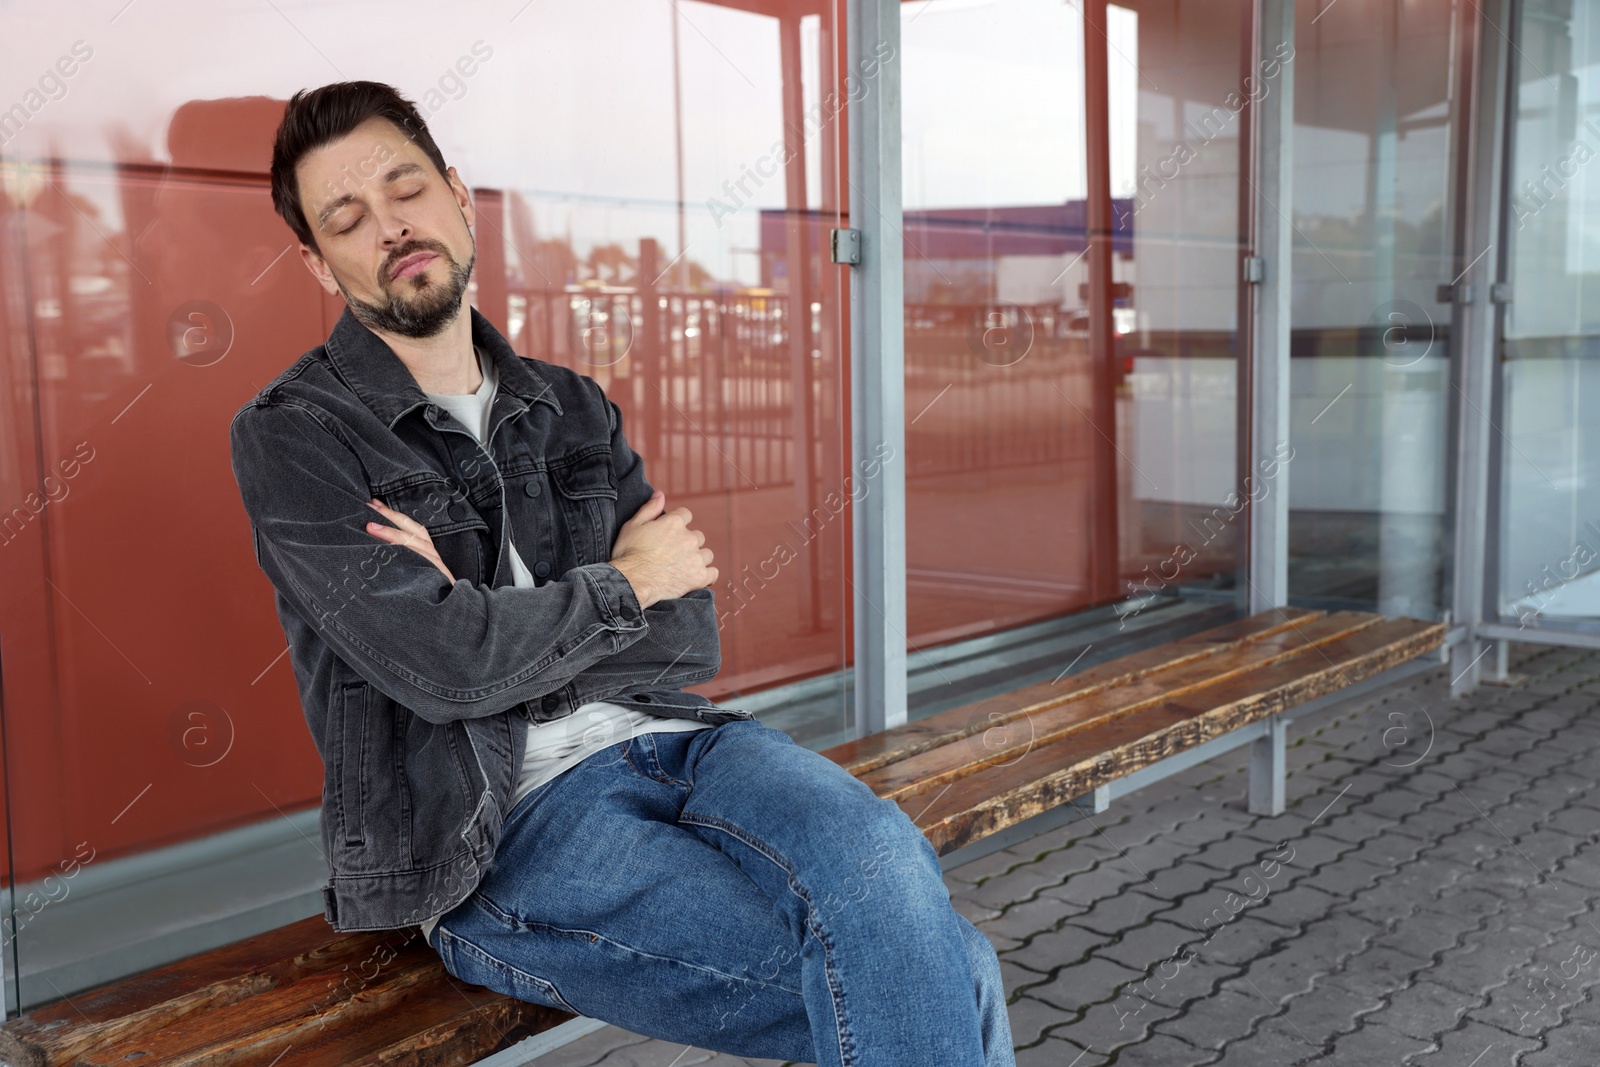 Photo of Tired man sleeping at public transport stop outdoors